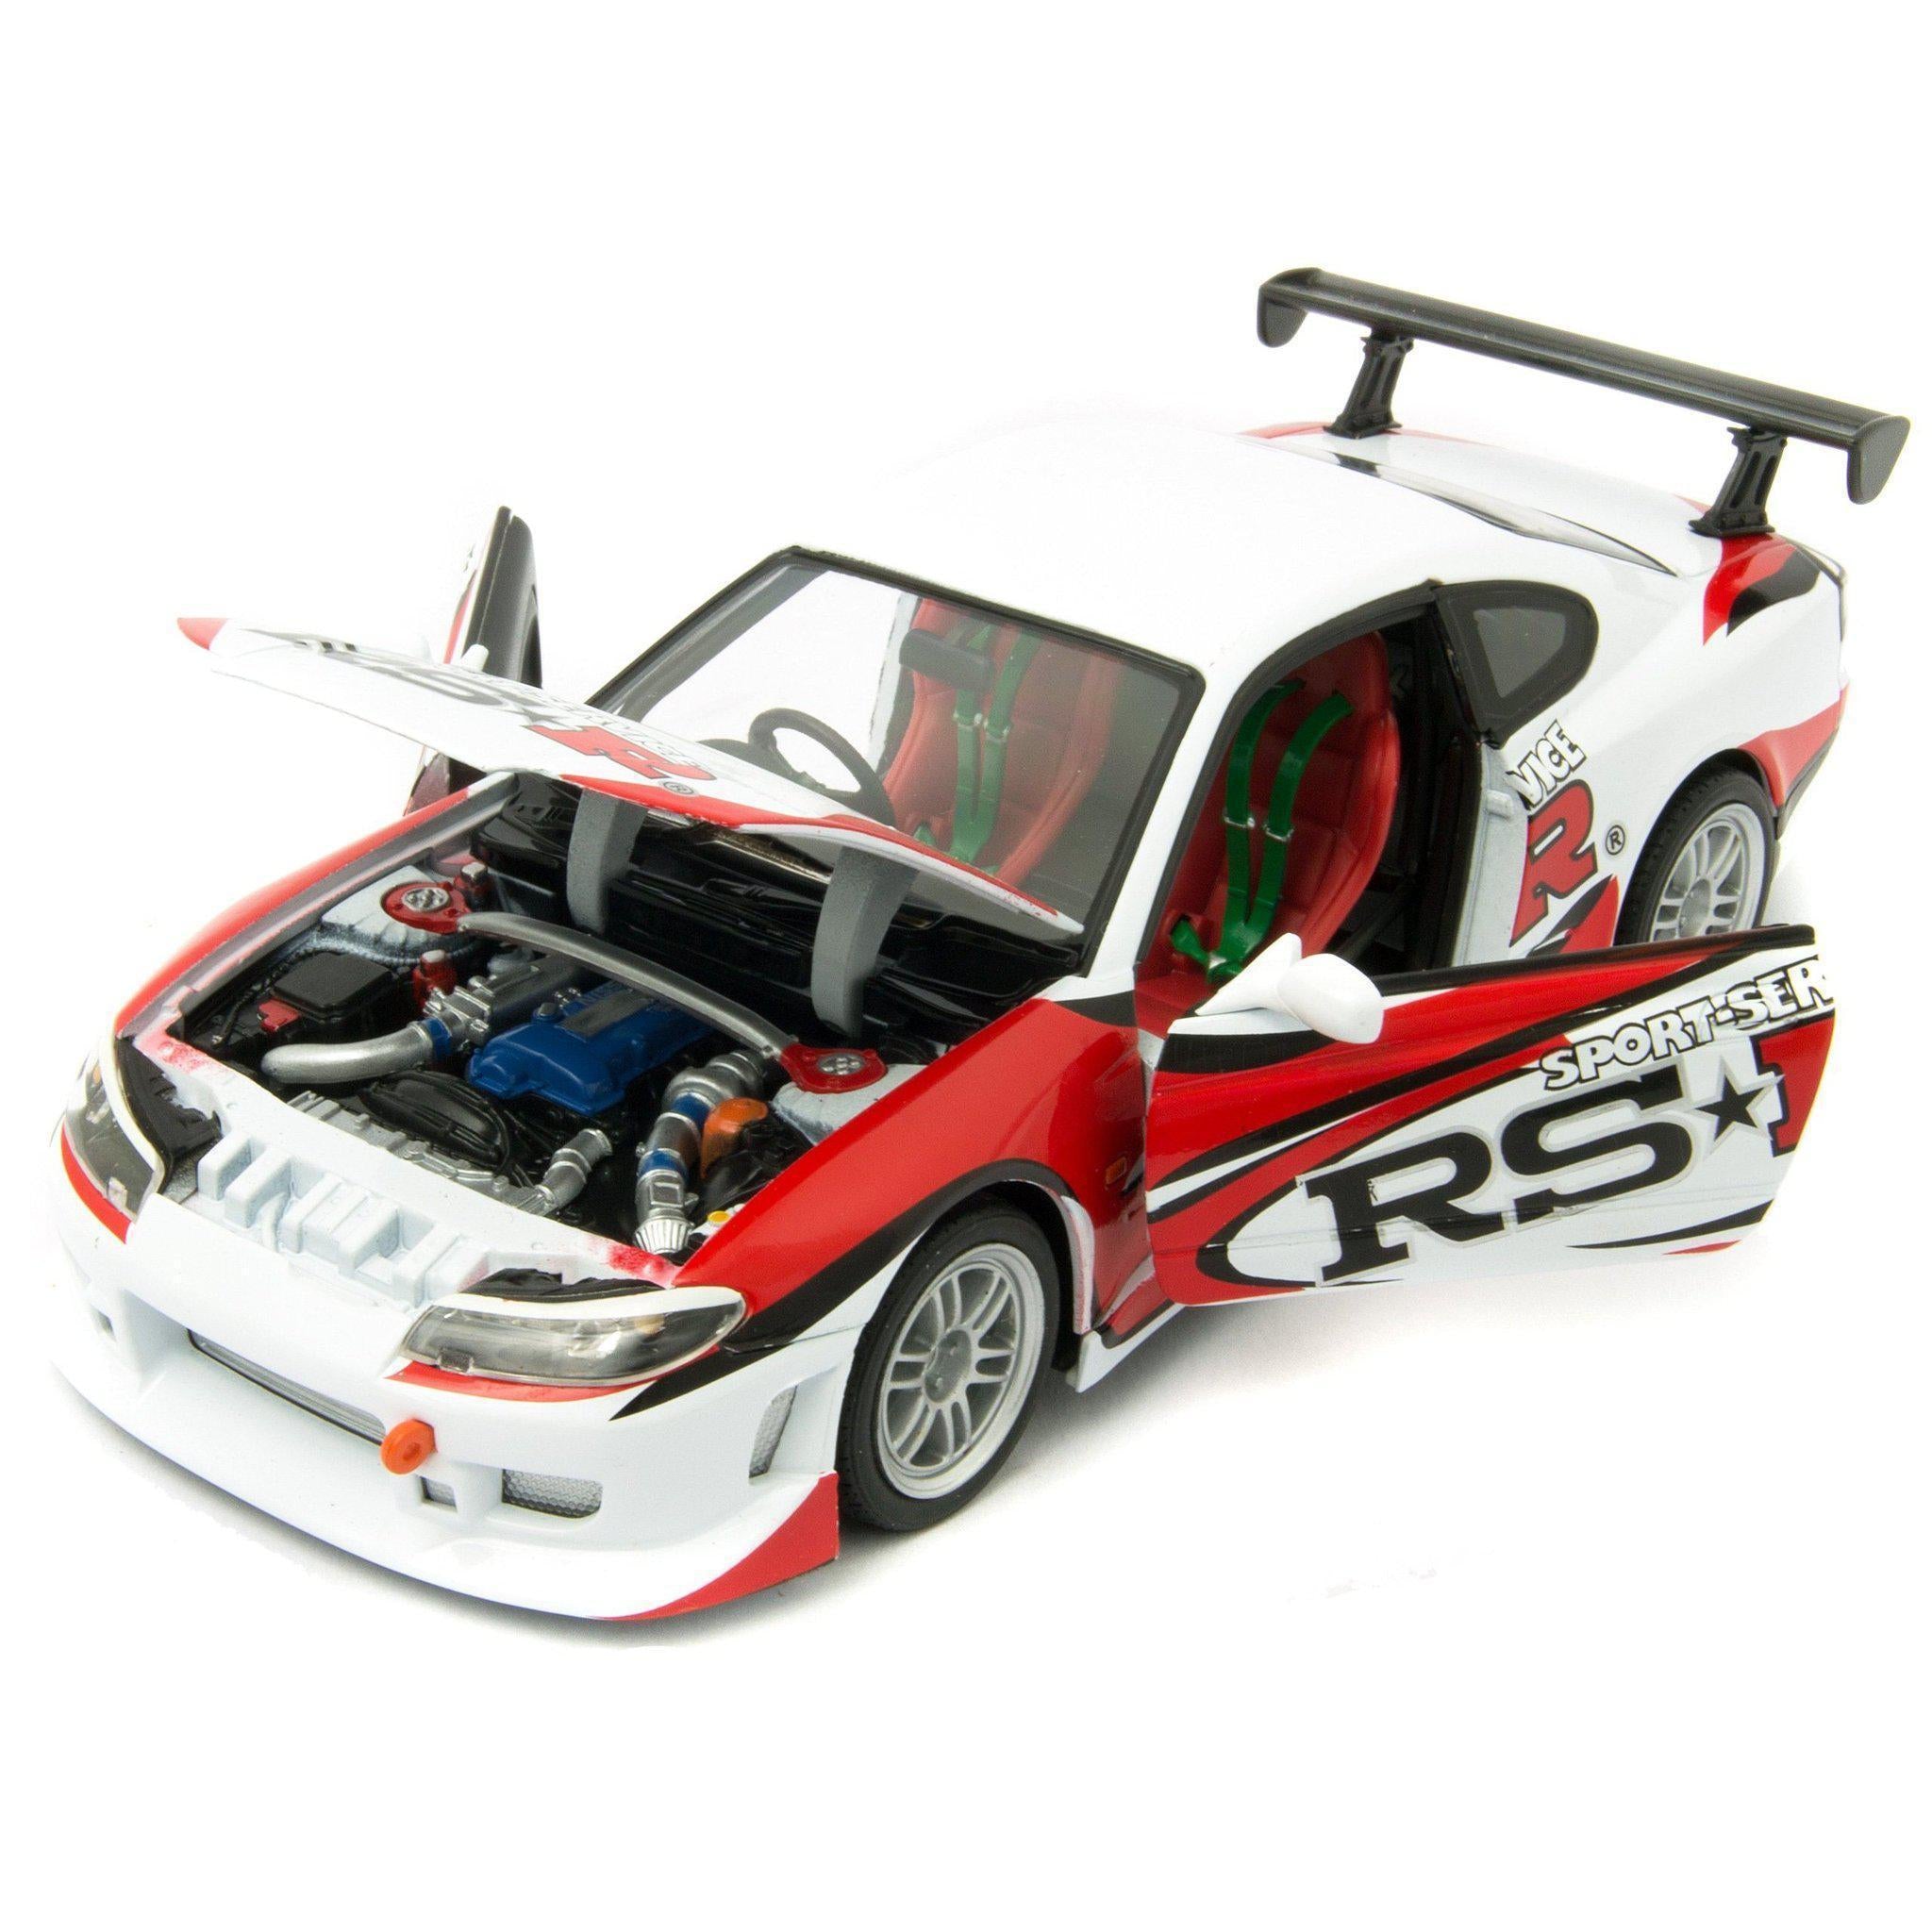 Nissan Silvia S-15 RS-R Diecast Model Car - 1:24 Scale-Welly-Diecast Model Centre